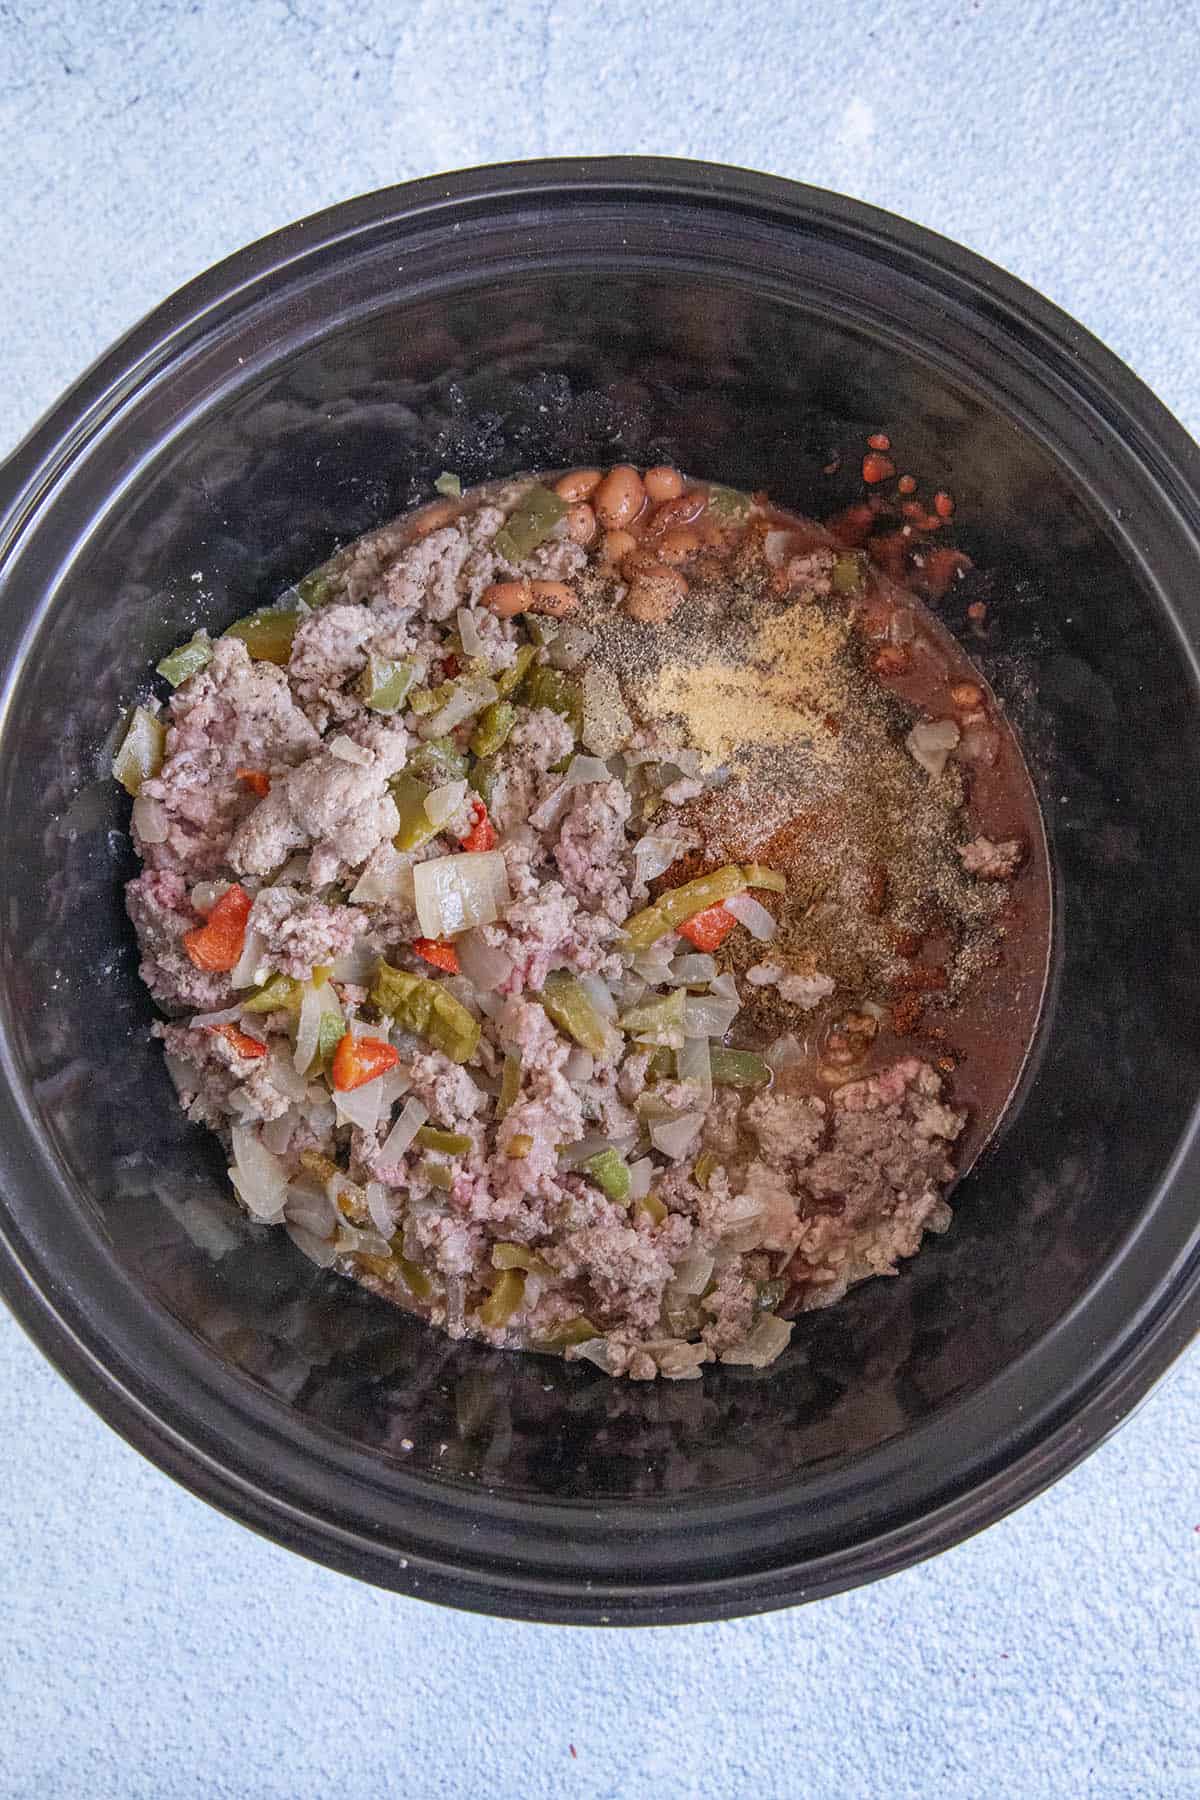 Adding the ingredients to the crock pot